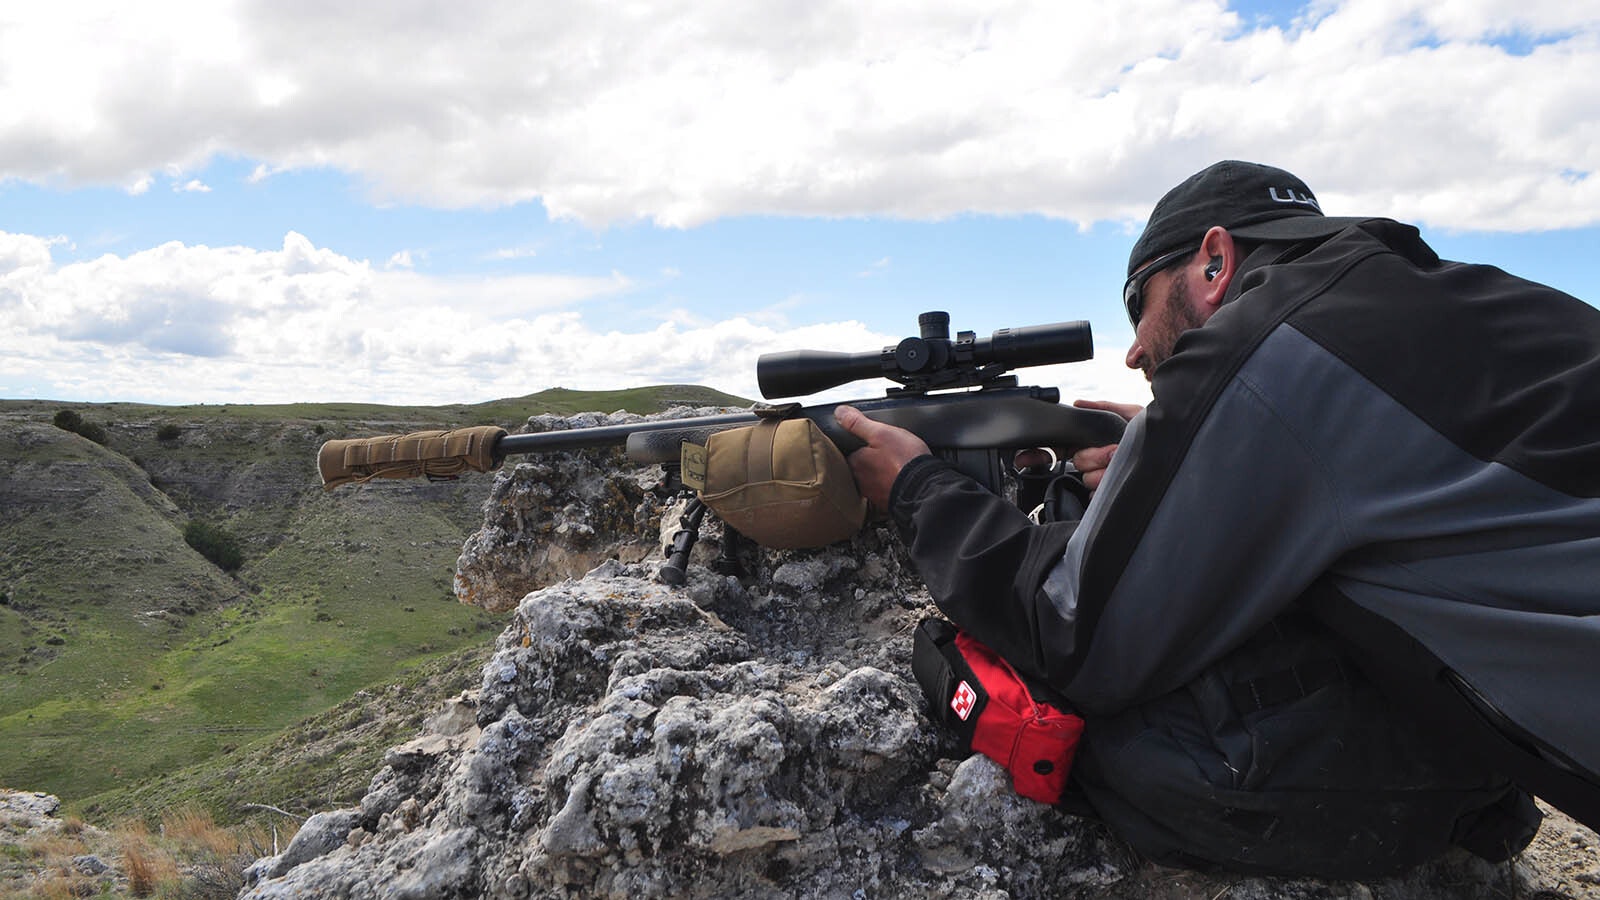 Jason Crotteau of Pavillion shoots a rifle chambered in 6.5 Creedmoor during a recent National Rifle League competition in Broadwater, Nebraska. He loves the caliber, despite some shooters making fun of it.